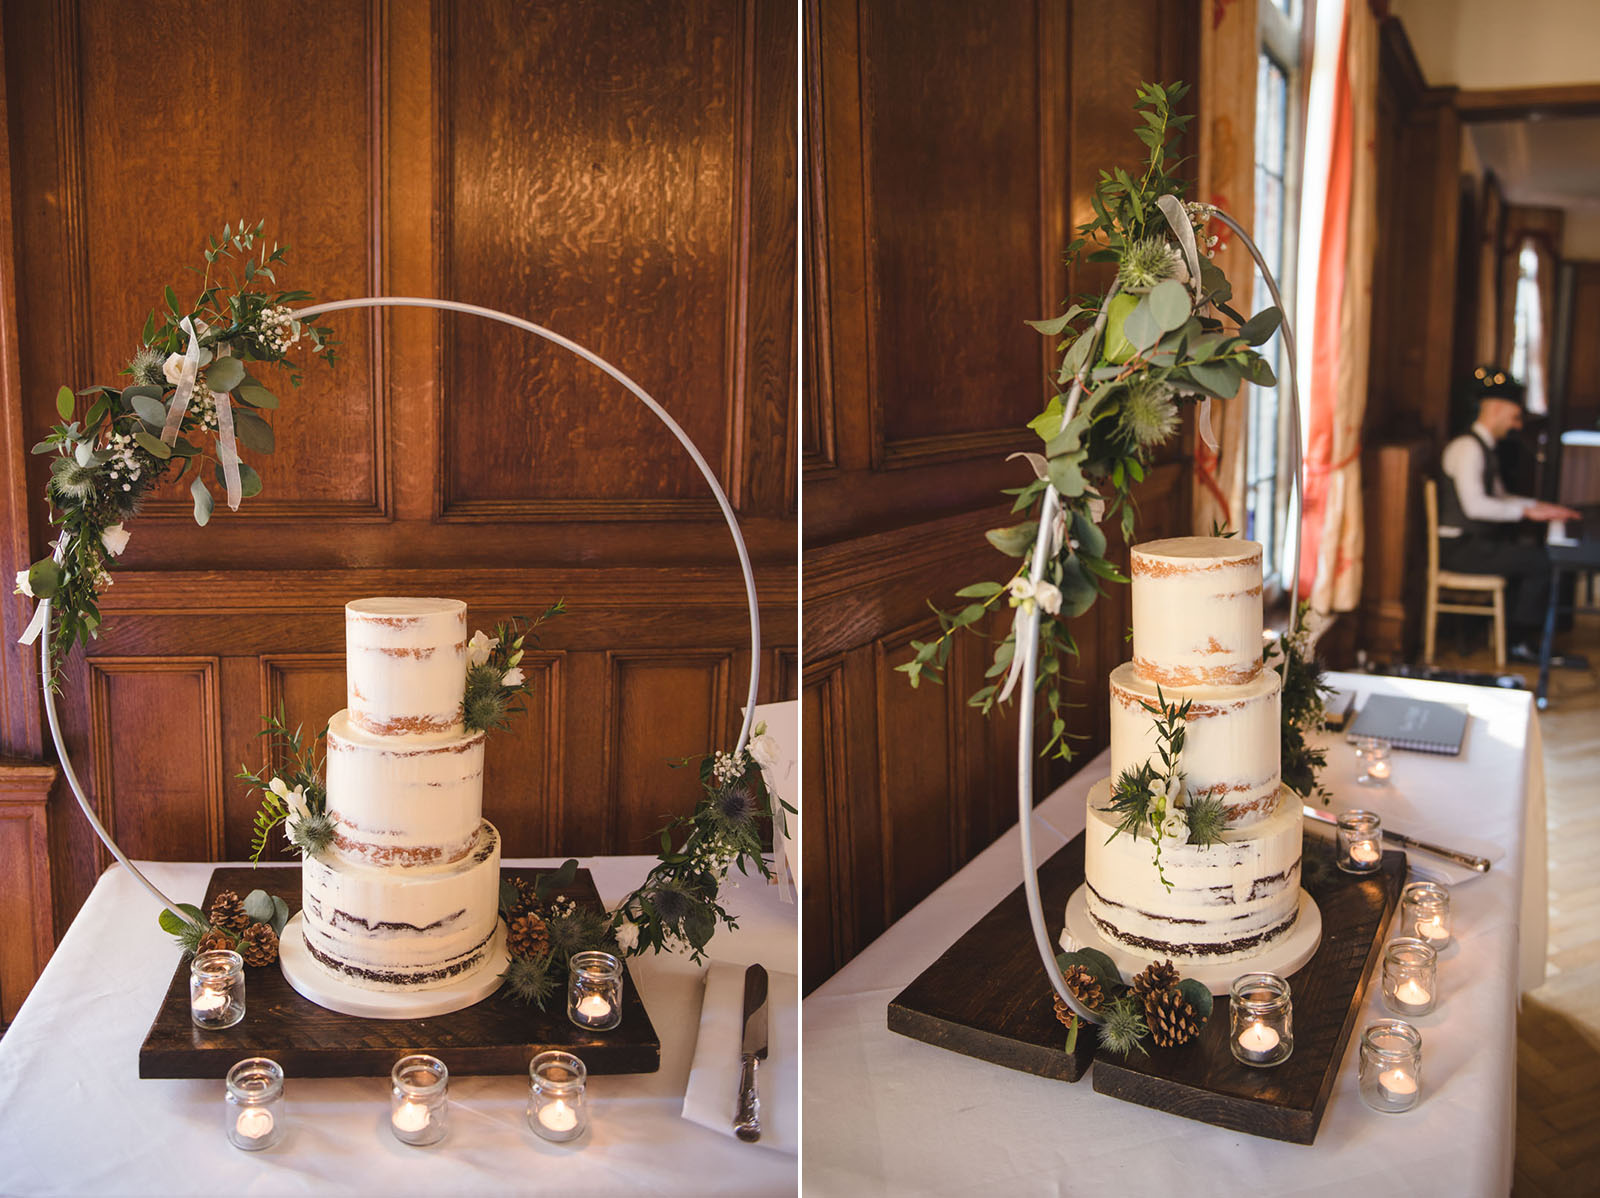 A semi naked wedding cake for two grooms at Pennyhill park in Surrey.